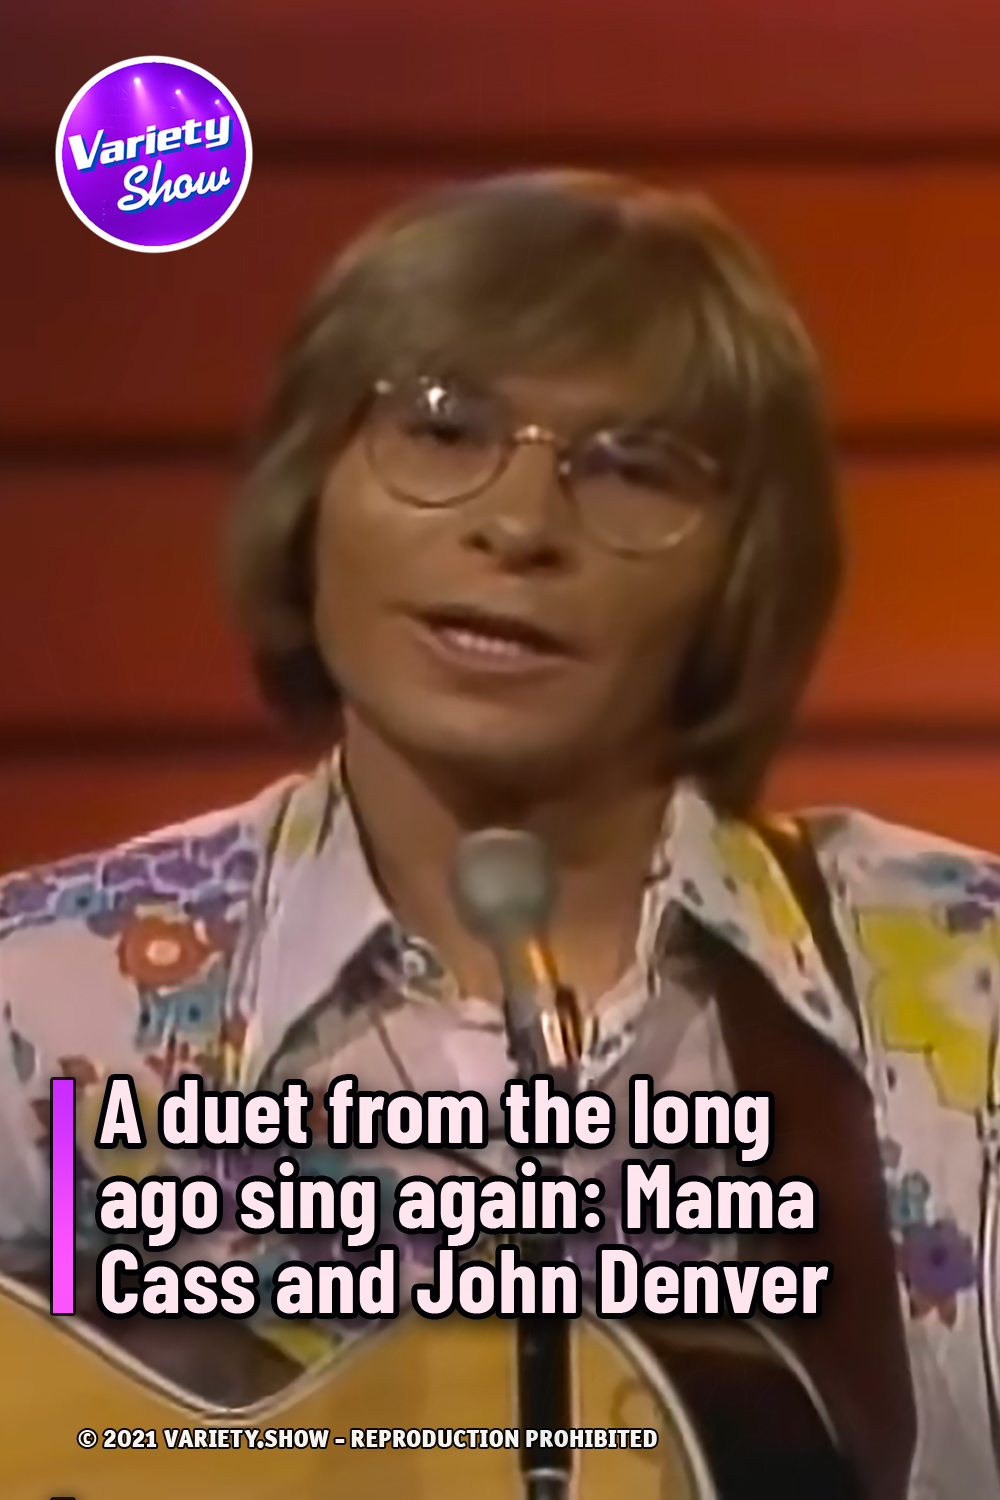 A duet from the long ago sing again: Mama Cass and John Denver